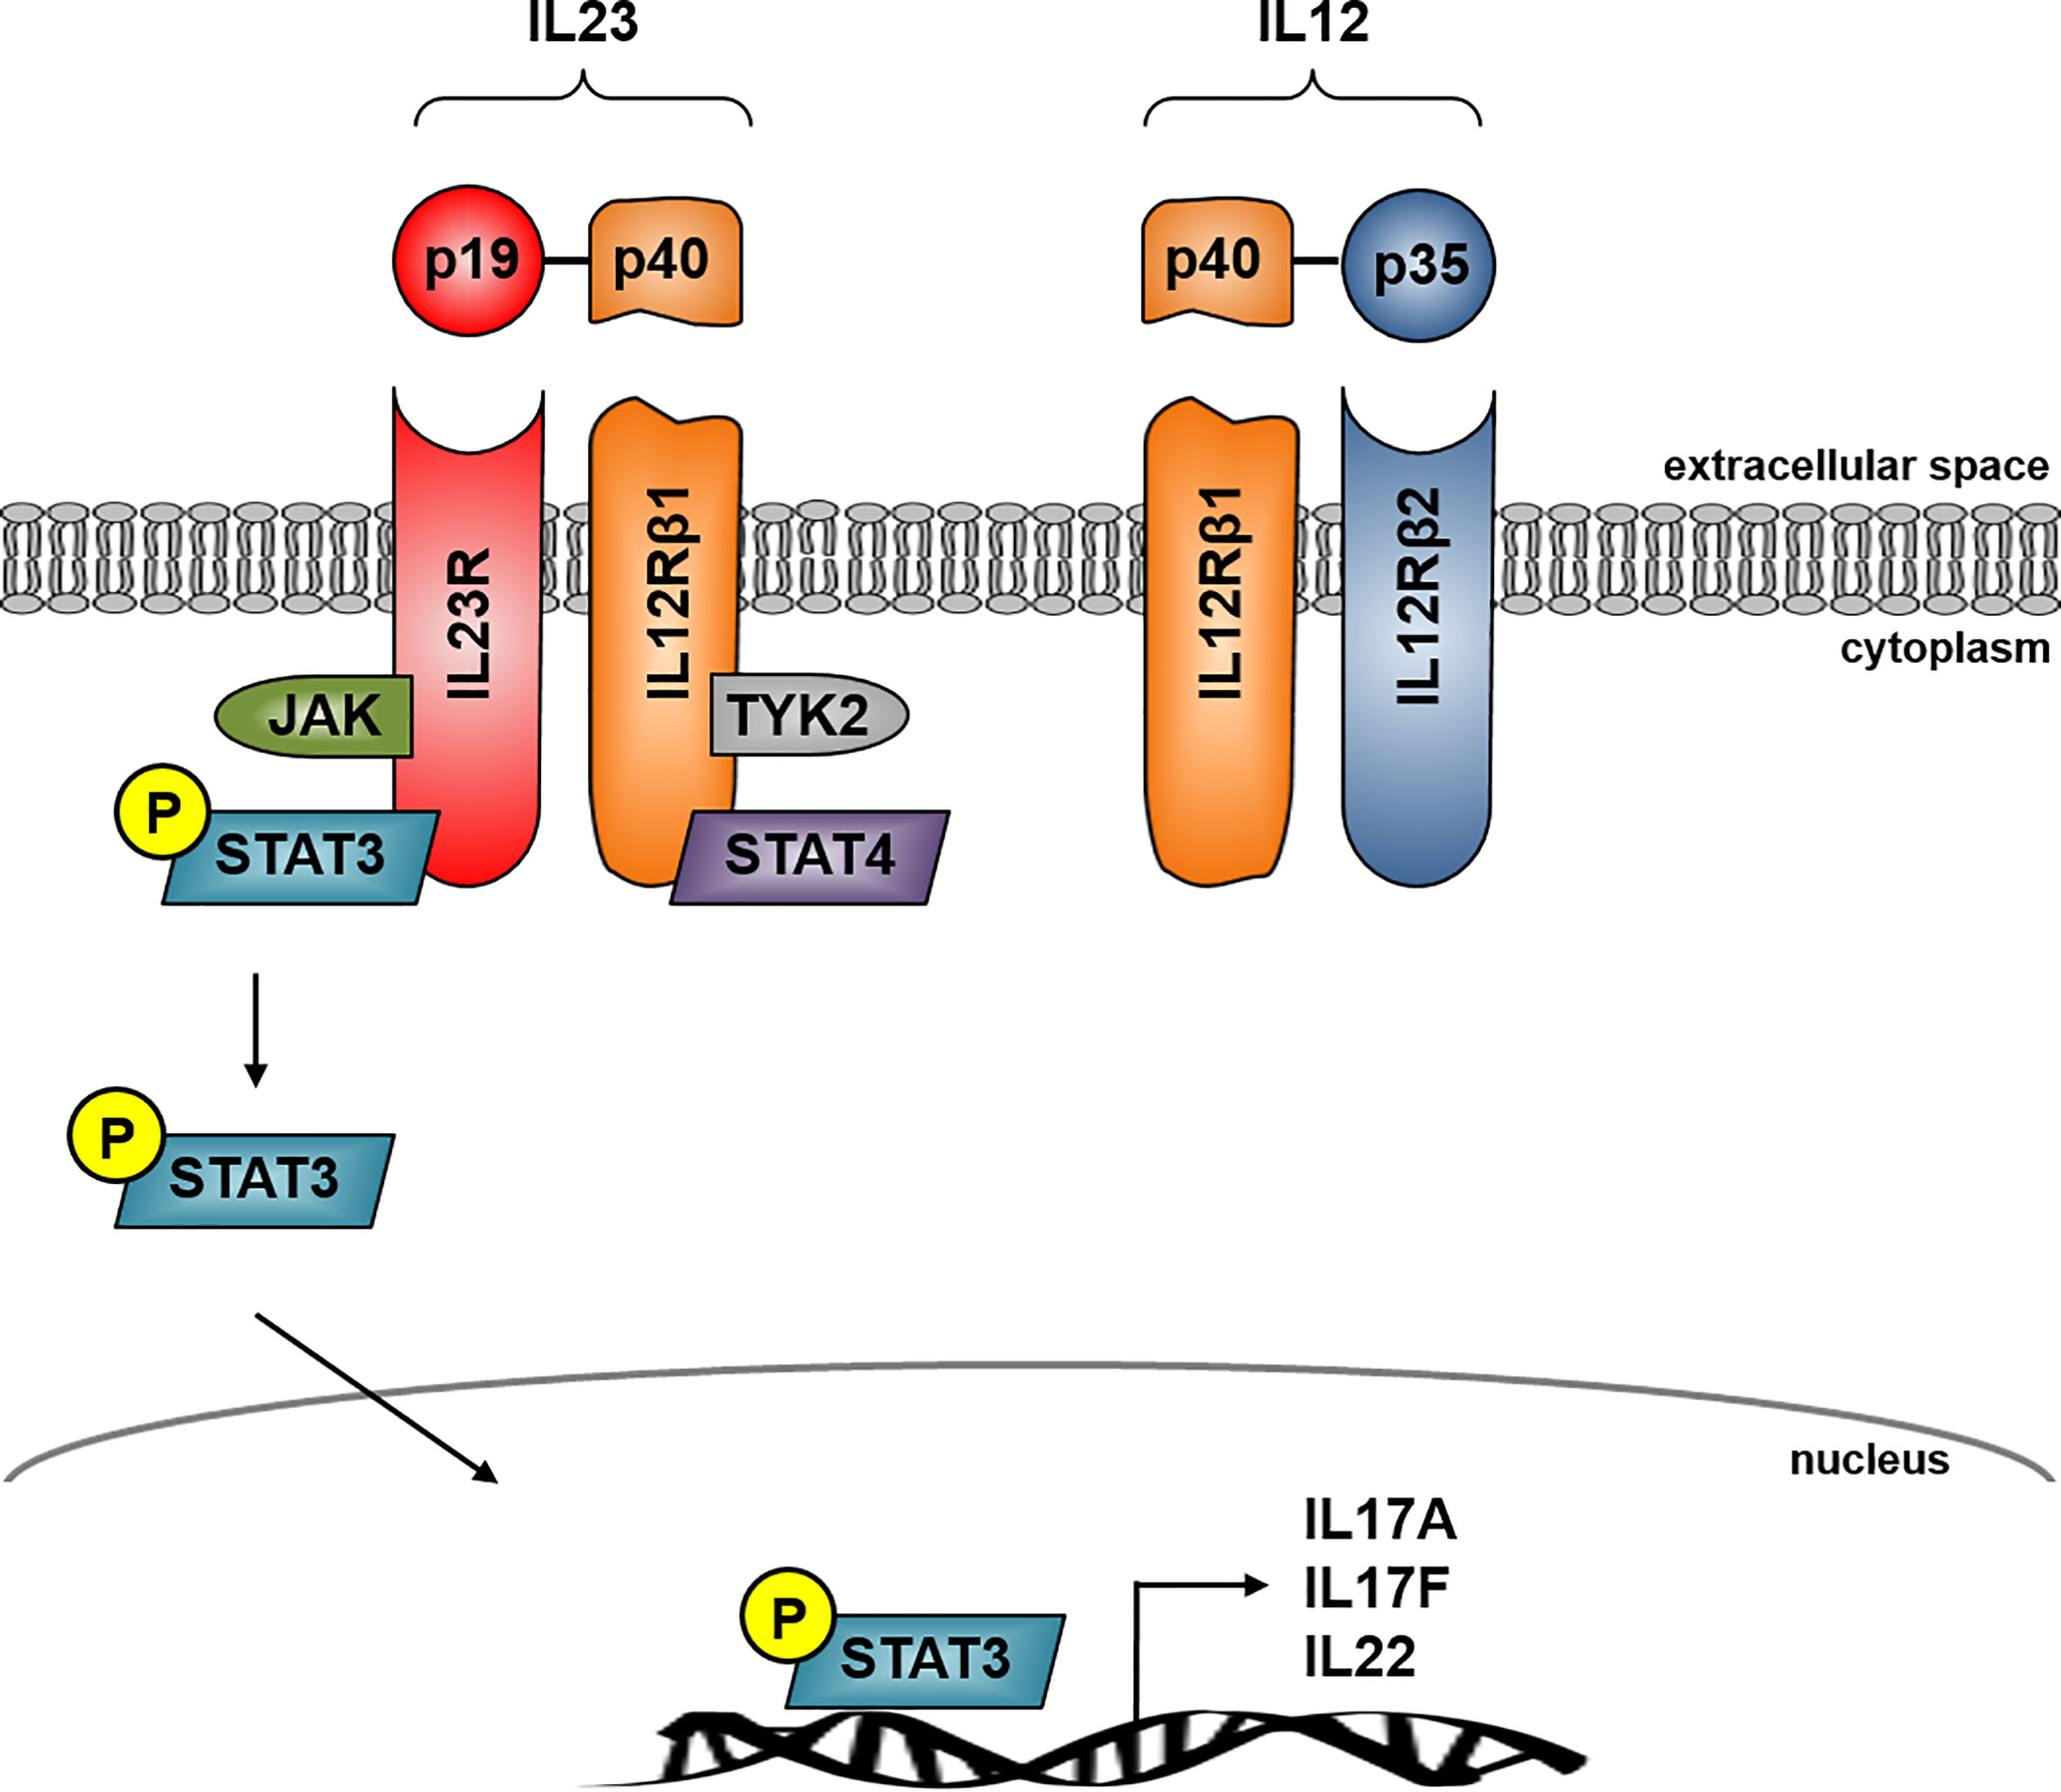 Frontiers Role Of The Il23 Il17 Pathway In Crohn S Disease Immunology